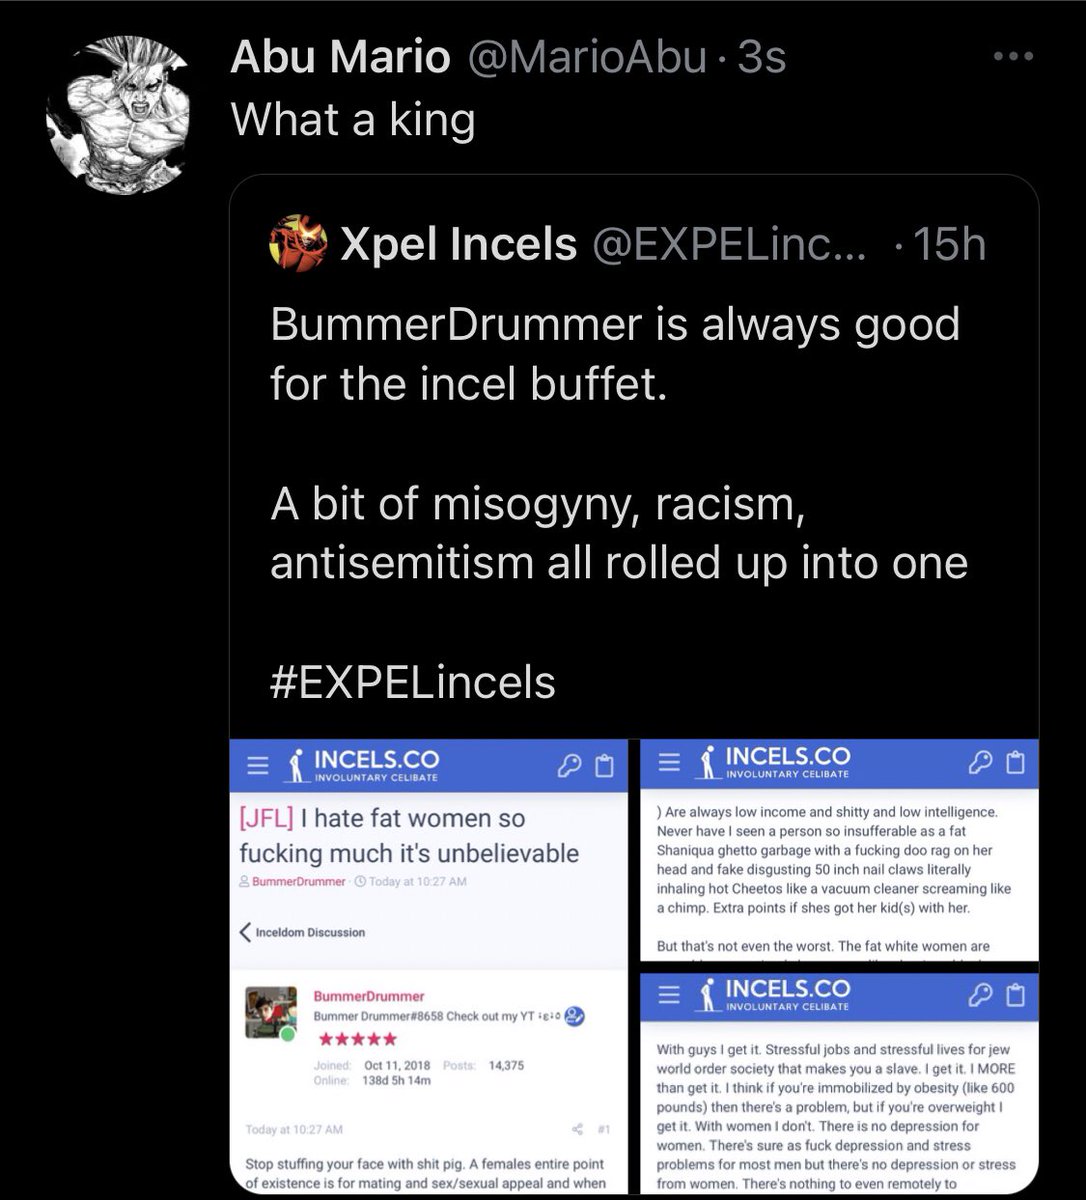 Response to post about racism, antisemitism: What a kingResponse to a pedophile school teacher: holy basedResponse to a Nazi: cool